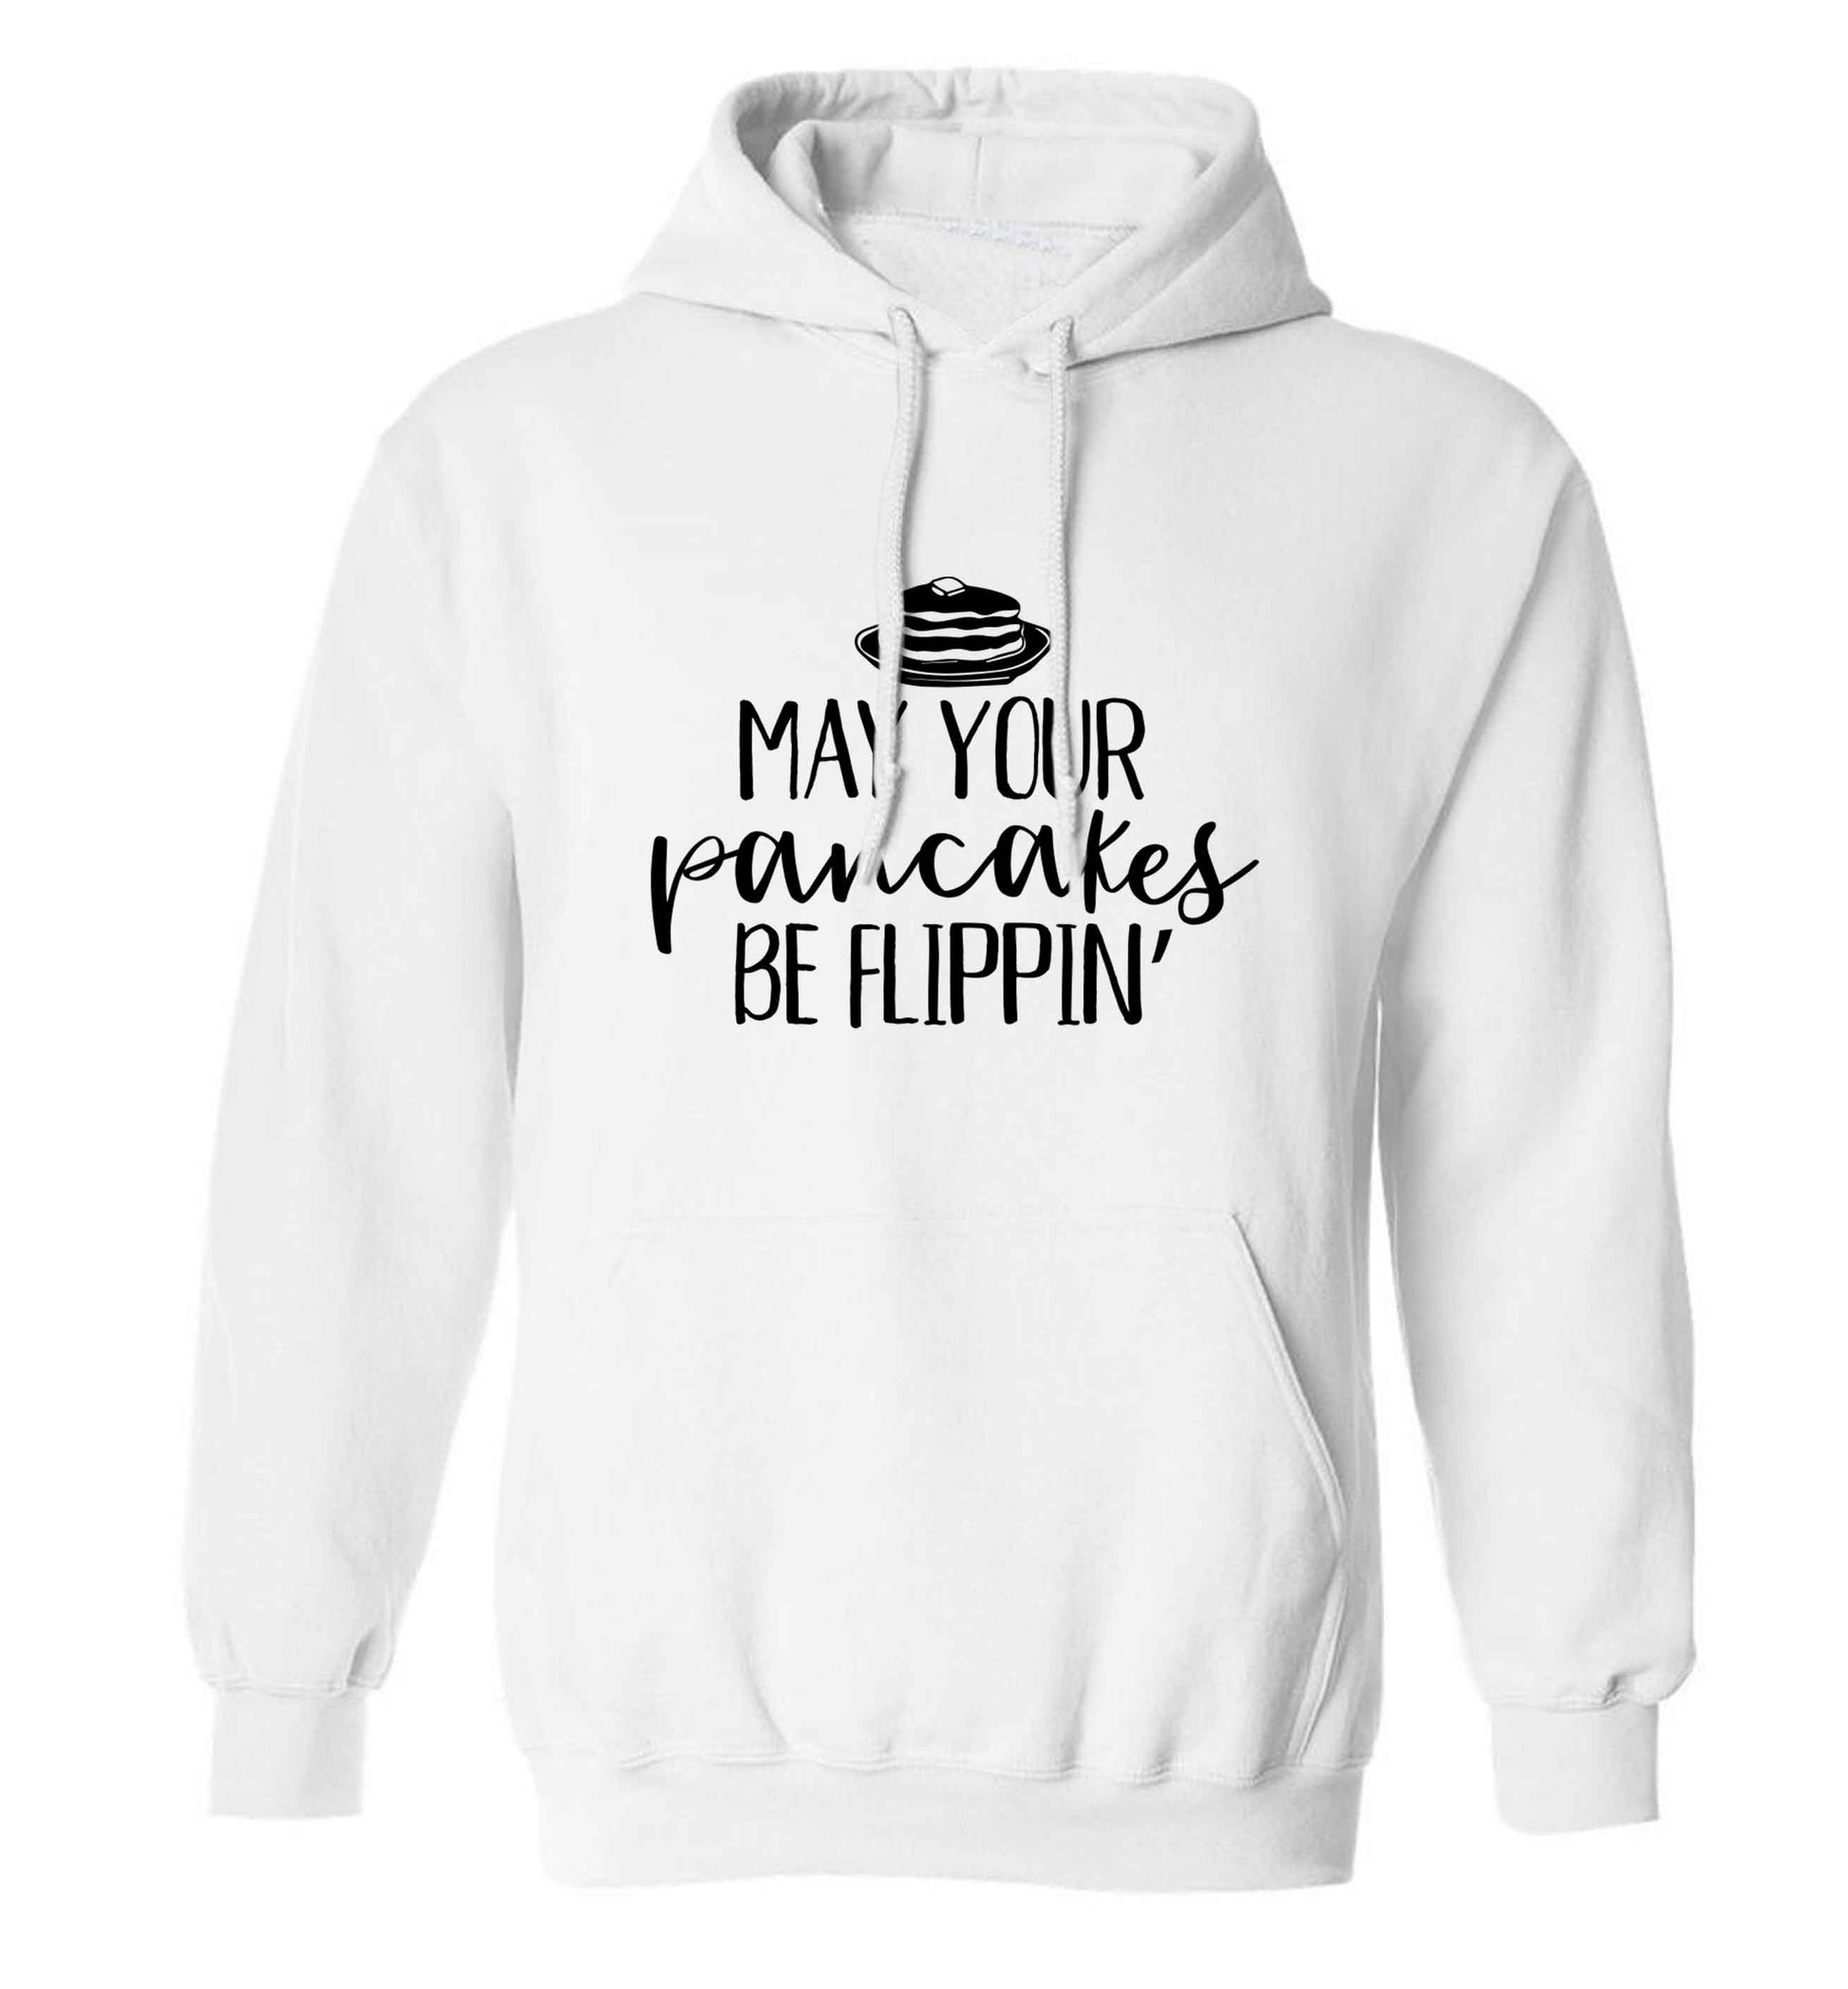 May your pancakes be flippin' adults unisex white hoodie 2XL